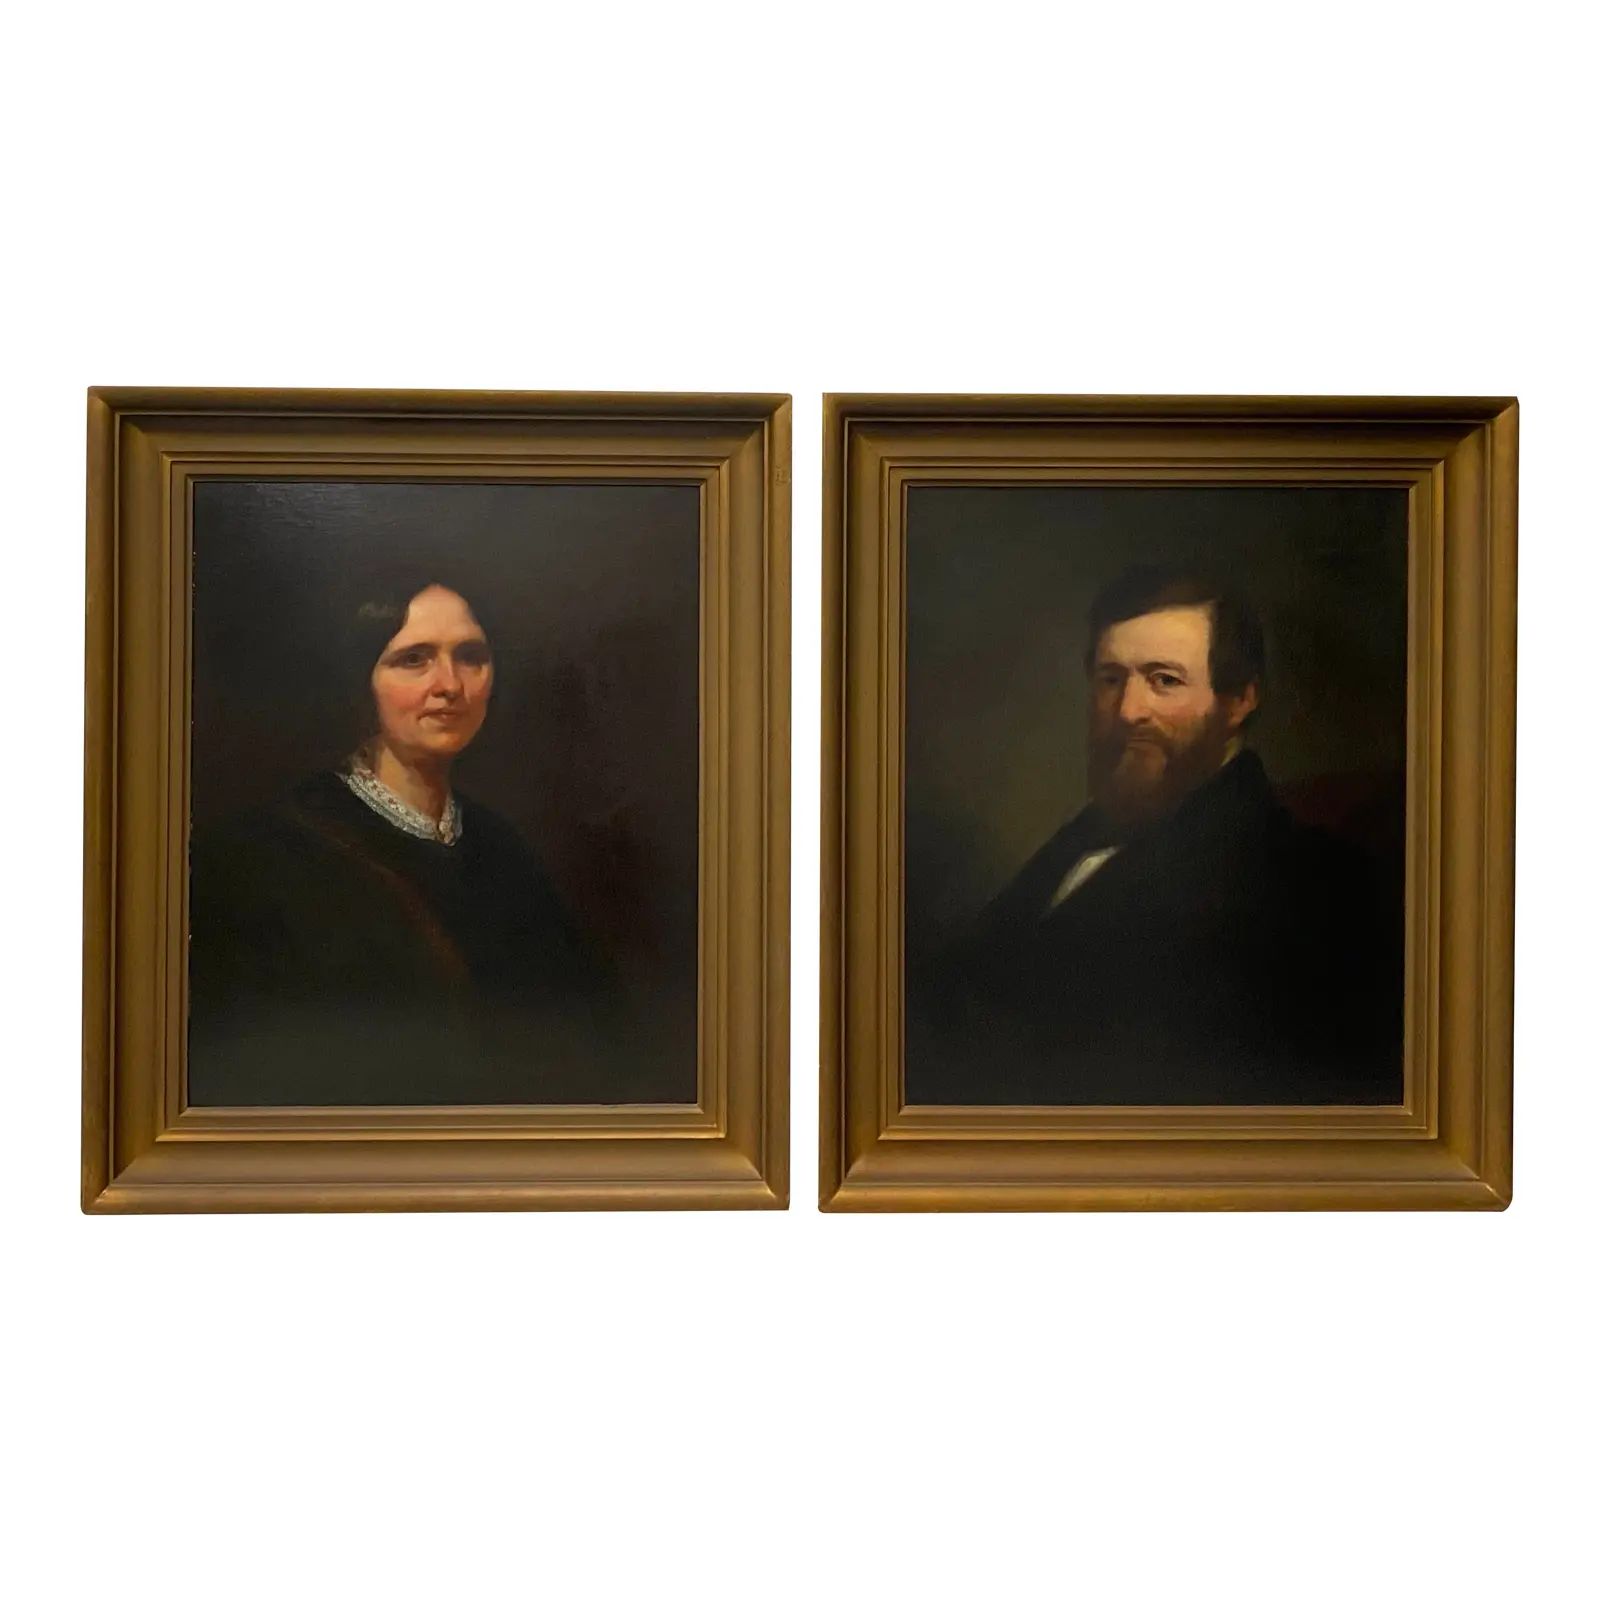 Mid 19th Century Oil Portraits of a Man and Woman C.1850 - a Pair | Chairish